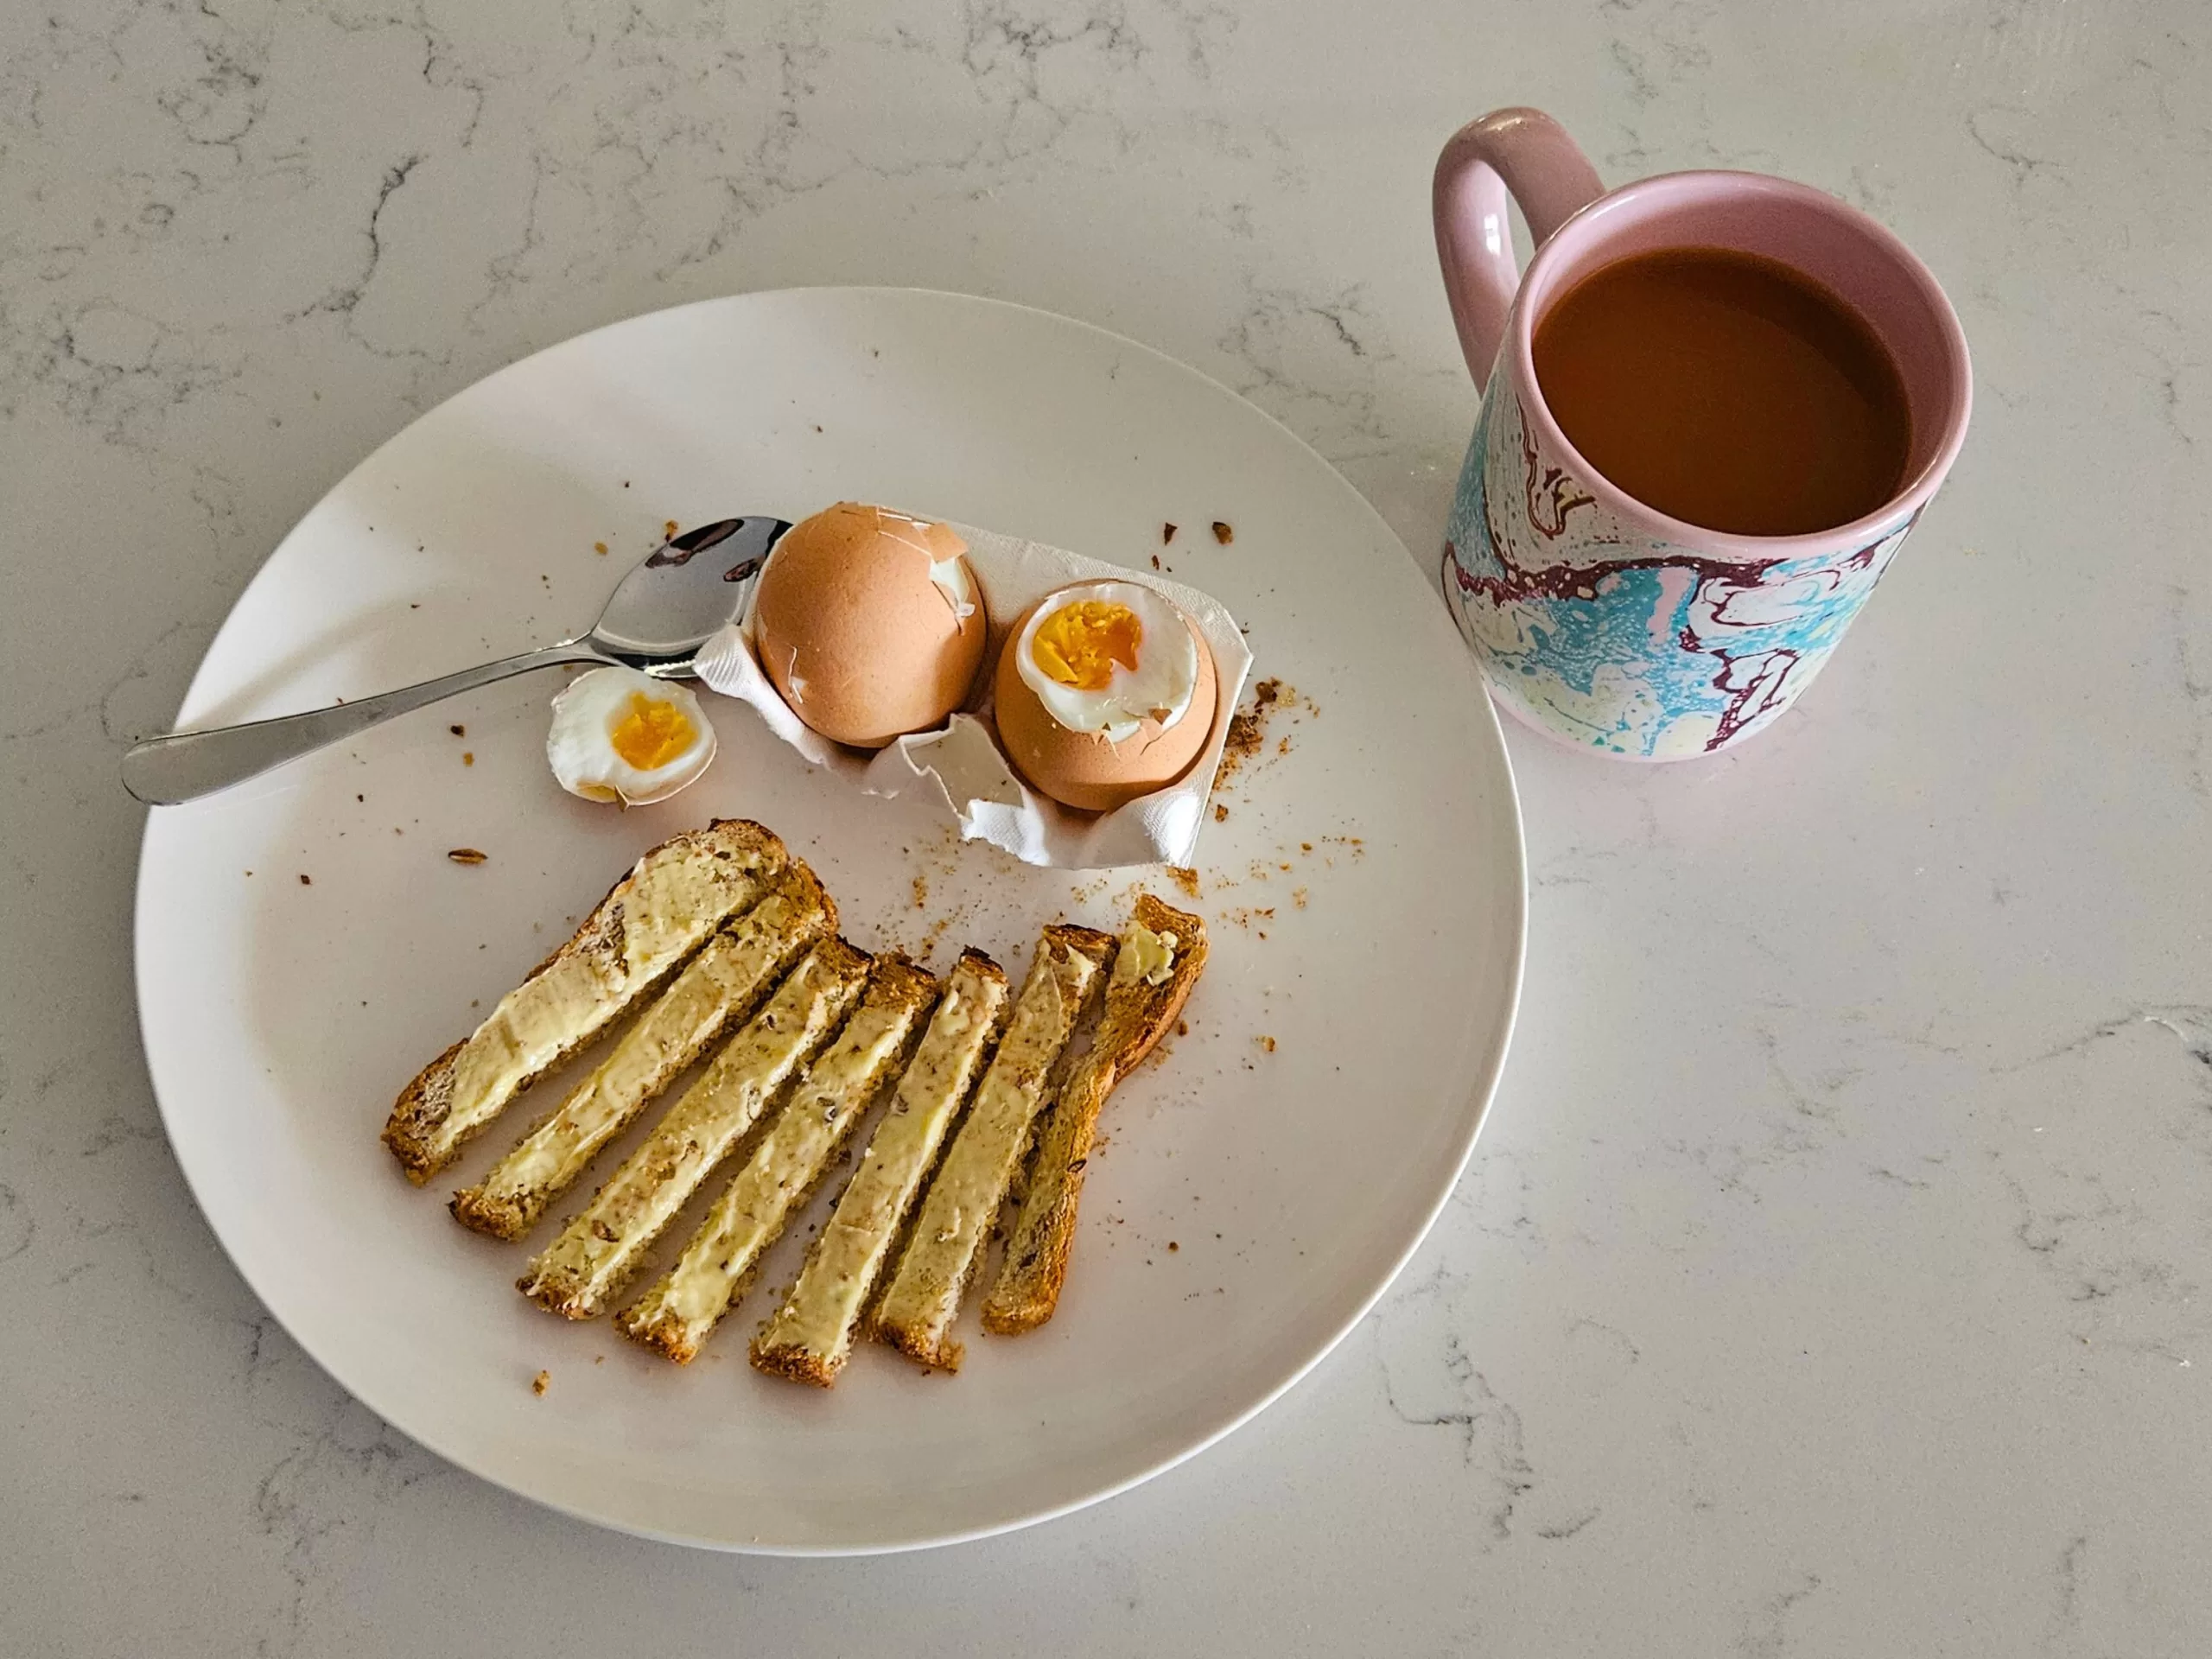 Vanlife Money Saving Tips - Avoid buying things you don't really need! Like egg cups!